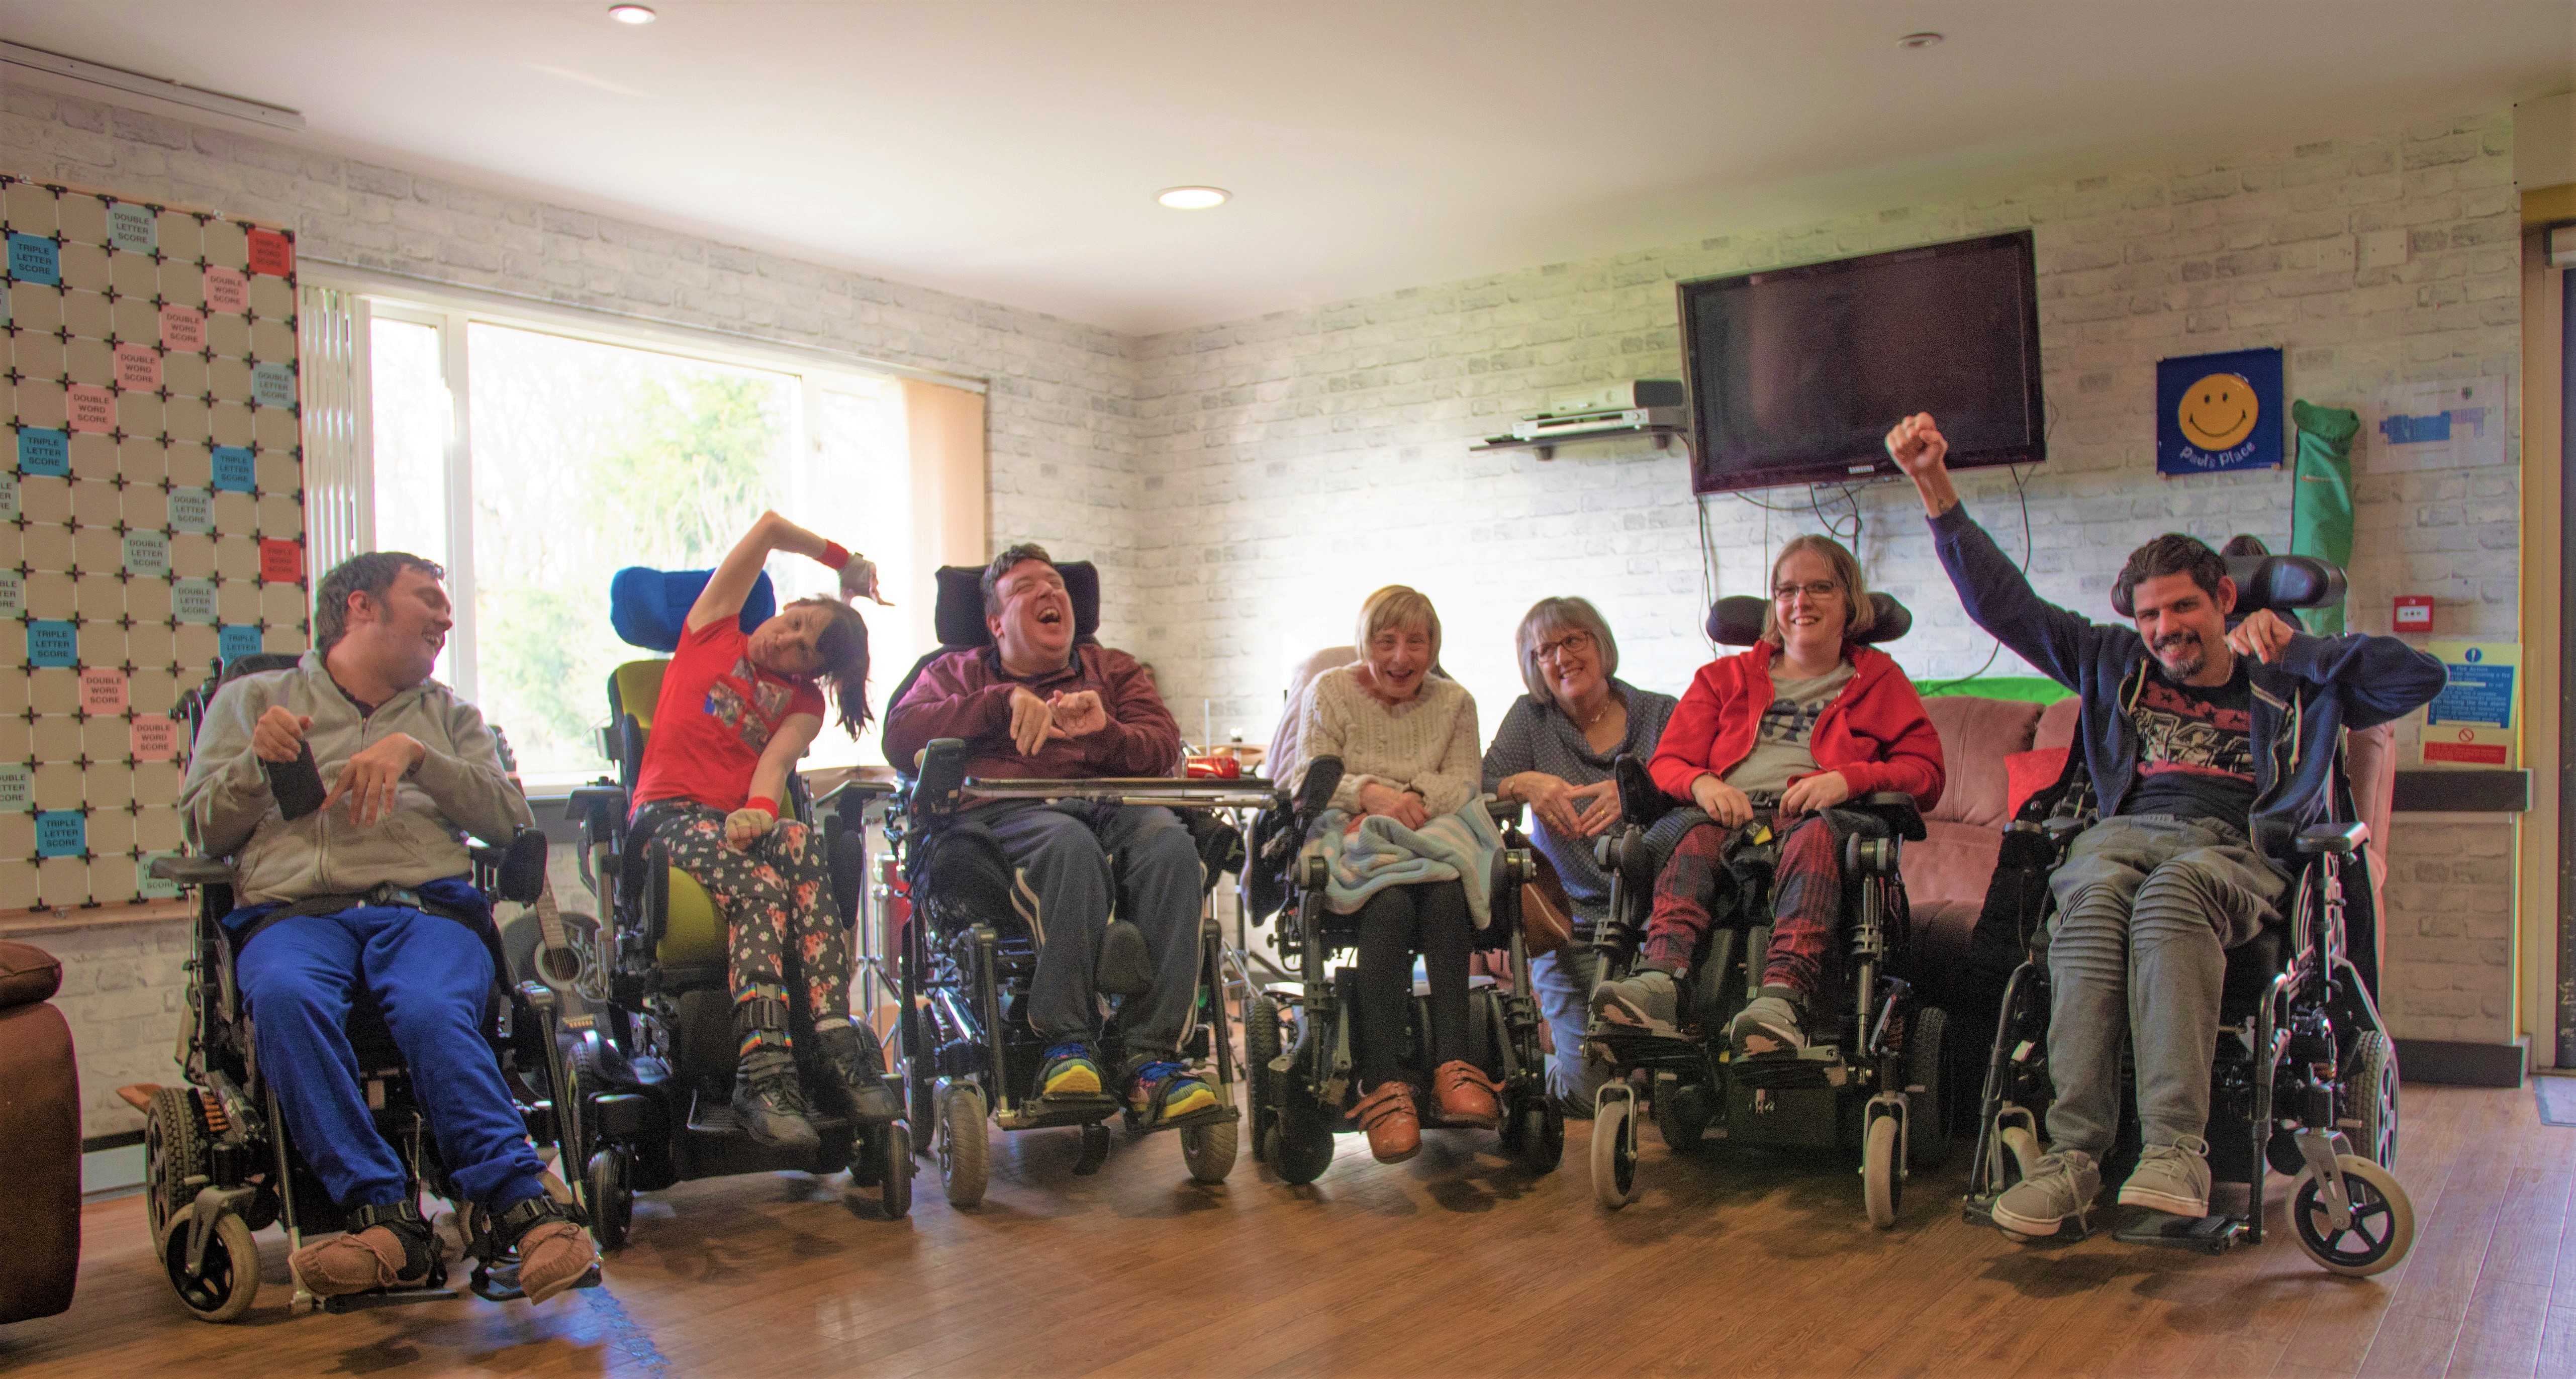 6 members and a carer at Paul's Place